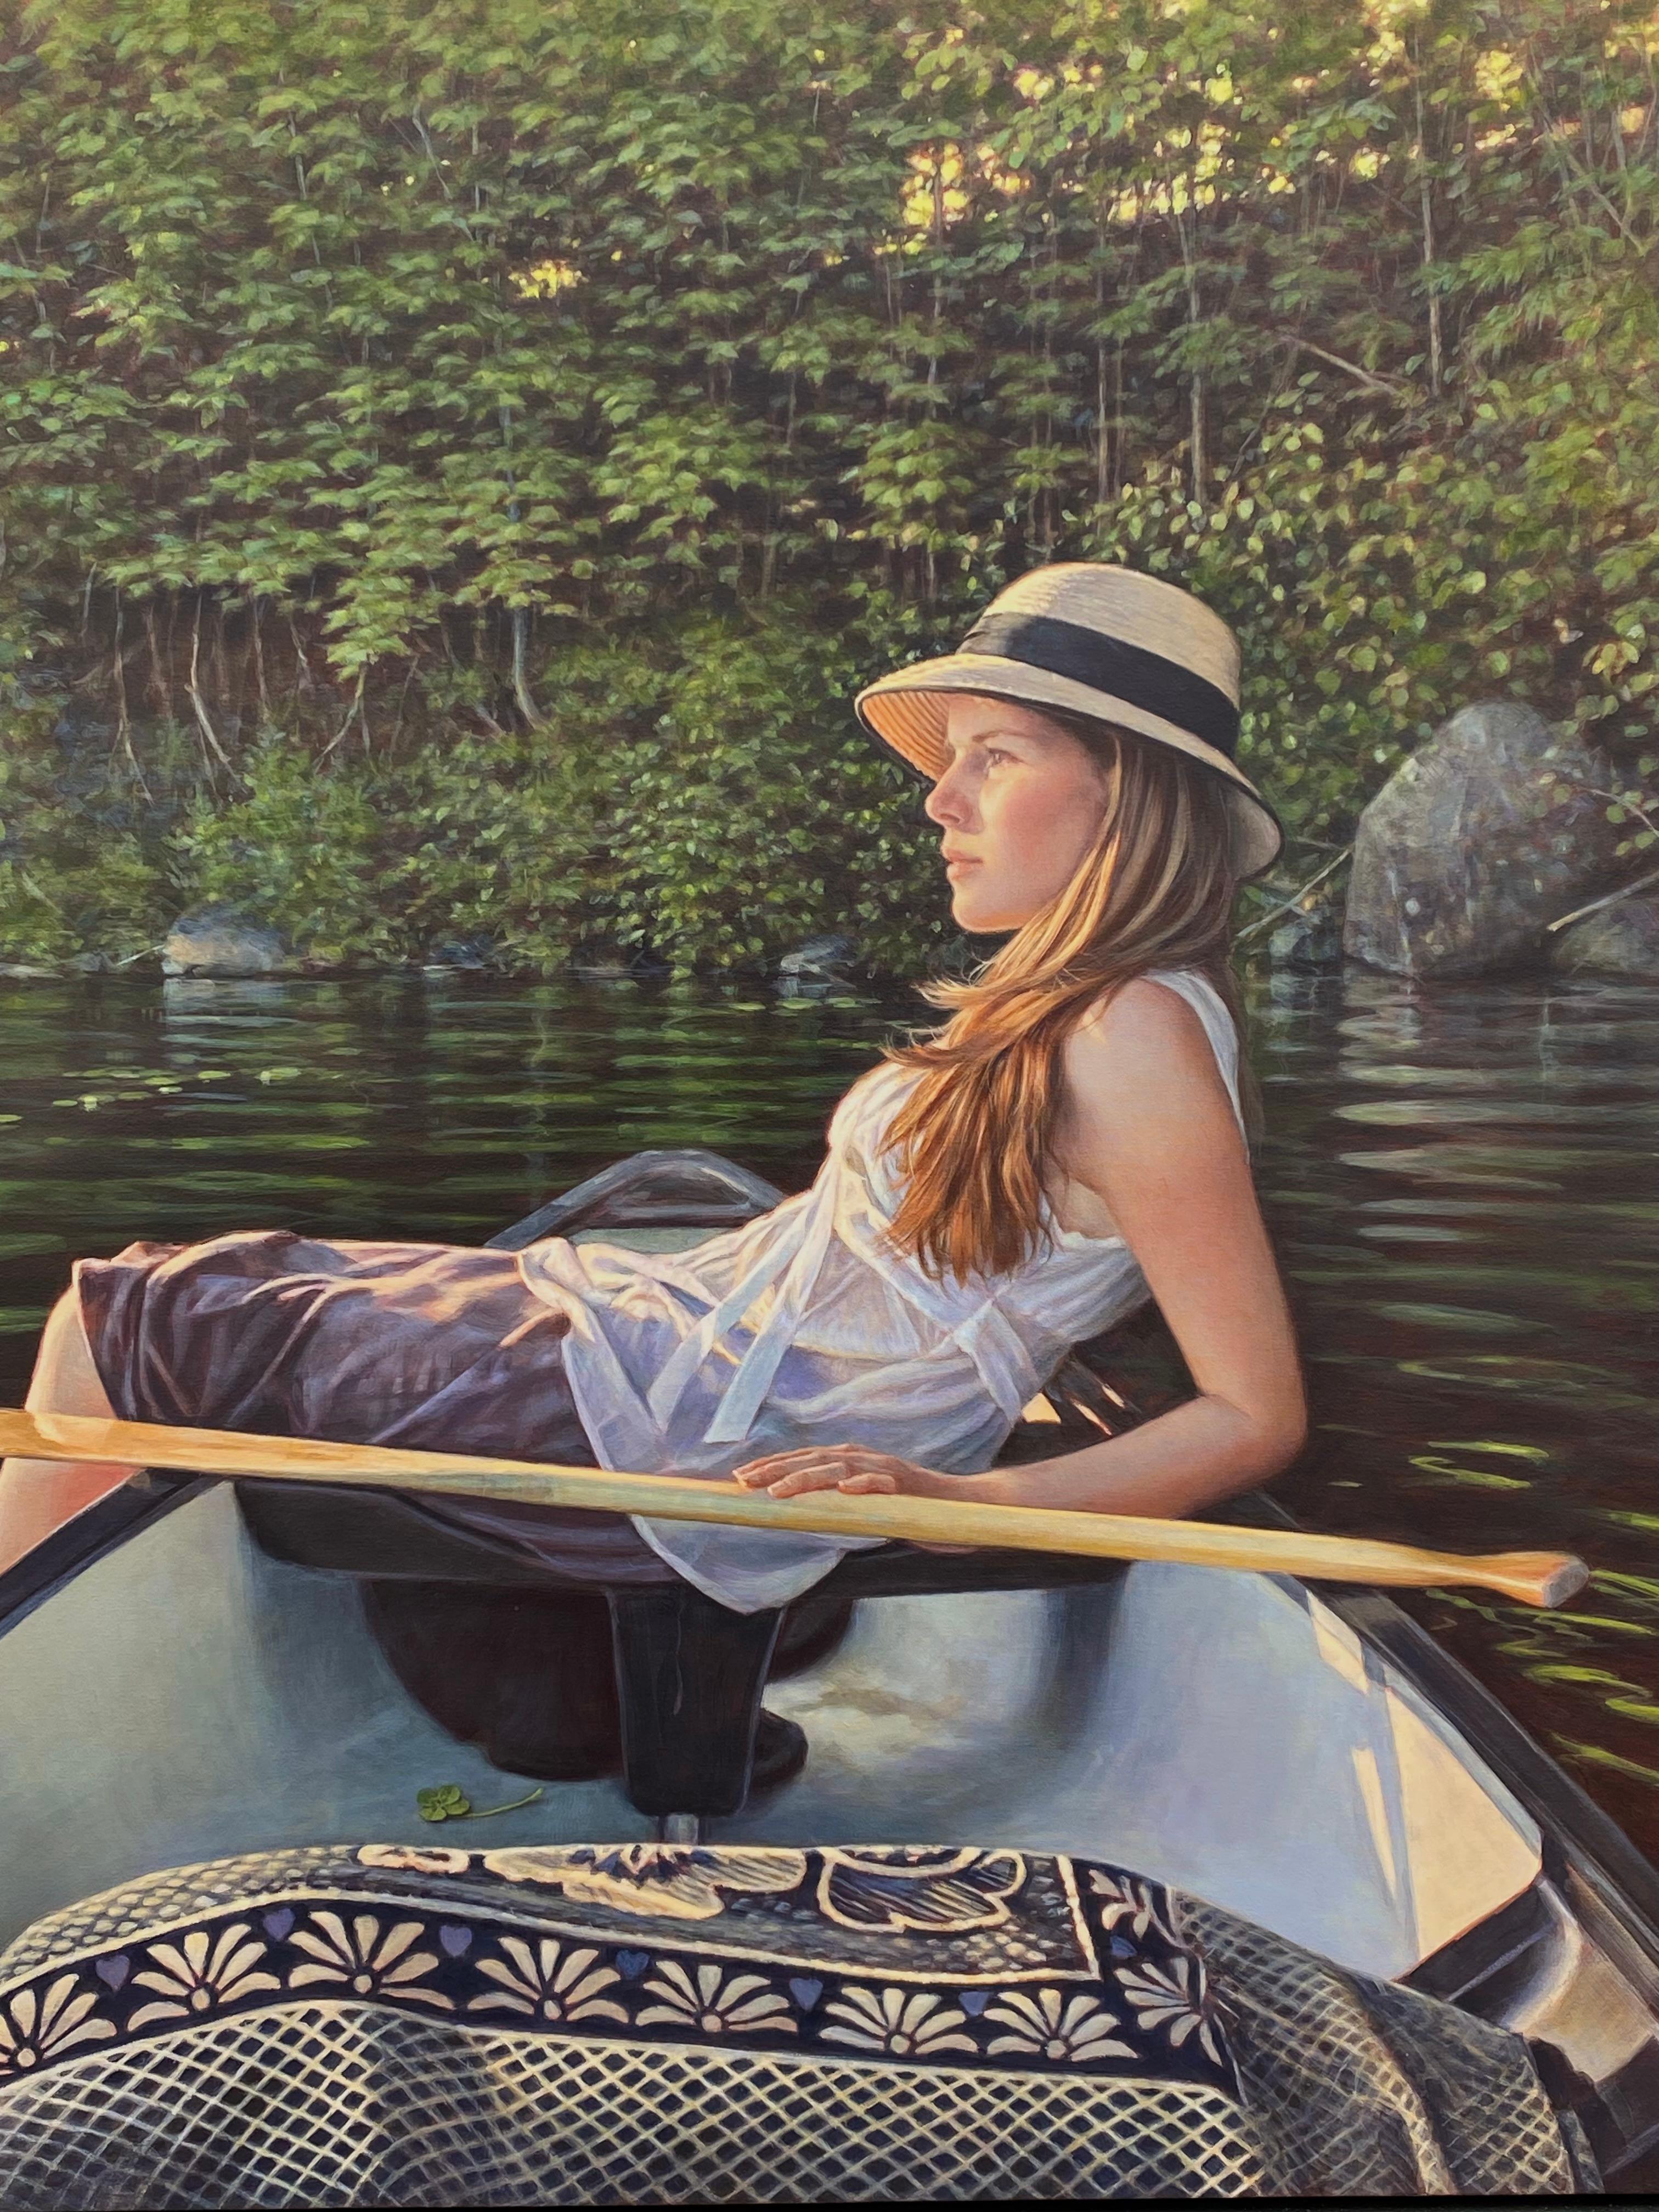 Beautifully executed original oil on canvas painting by the well known Canadian artist, Danielle Richard.  Signed by the artist lower left.  Condition is excellent. Titled “Summer Idyll”.  Provenance:  A Long Island, New York collector.

ARTIST